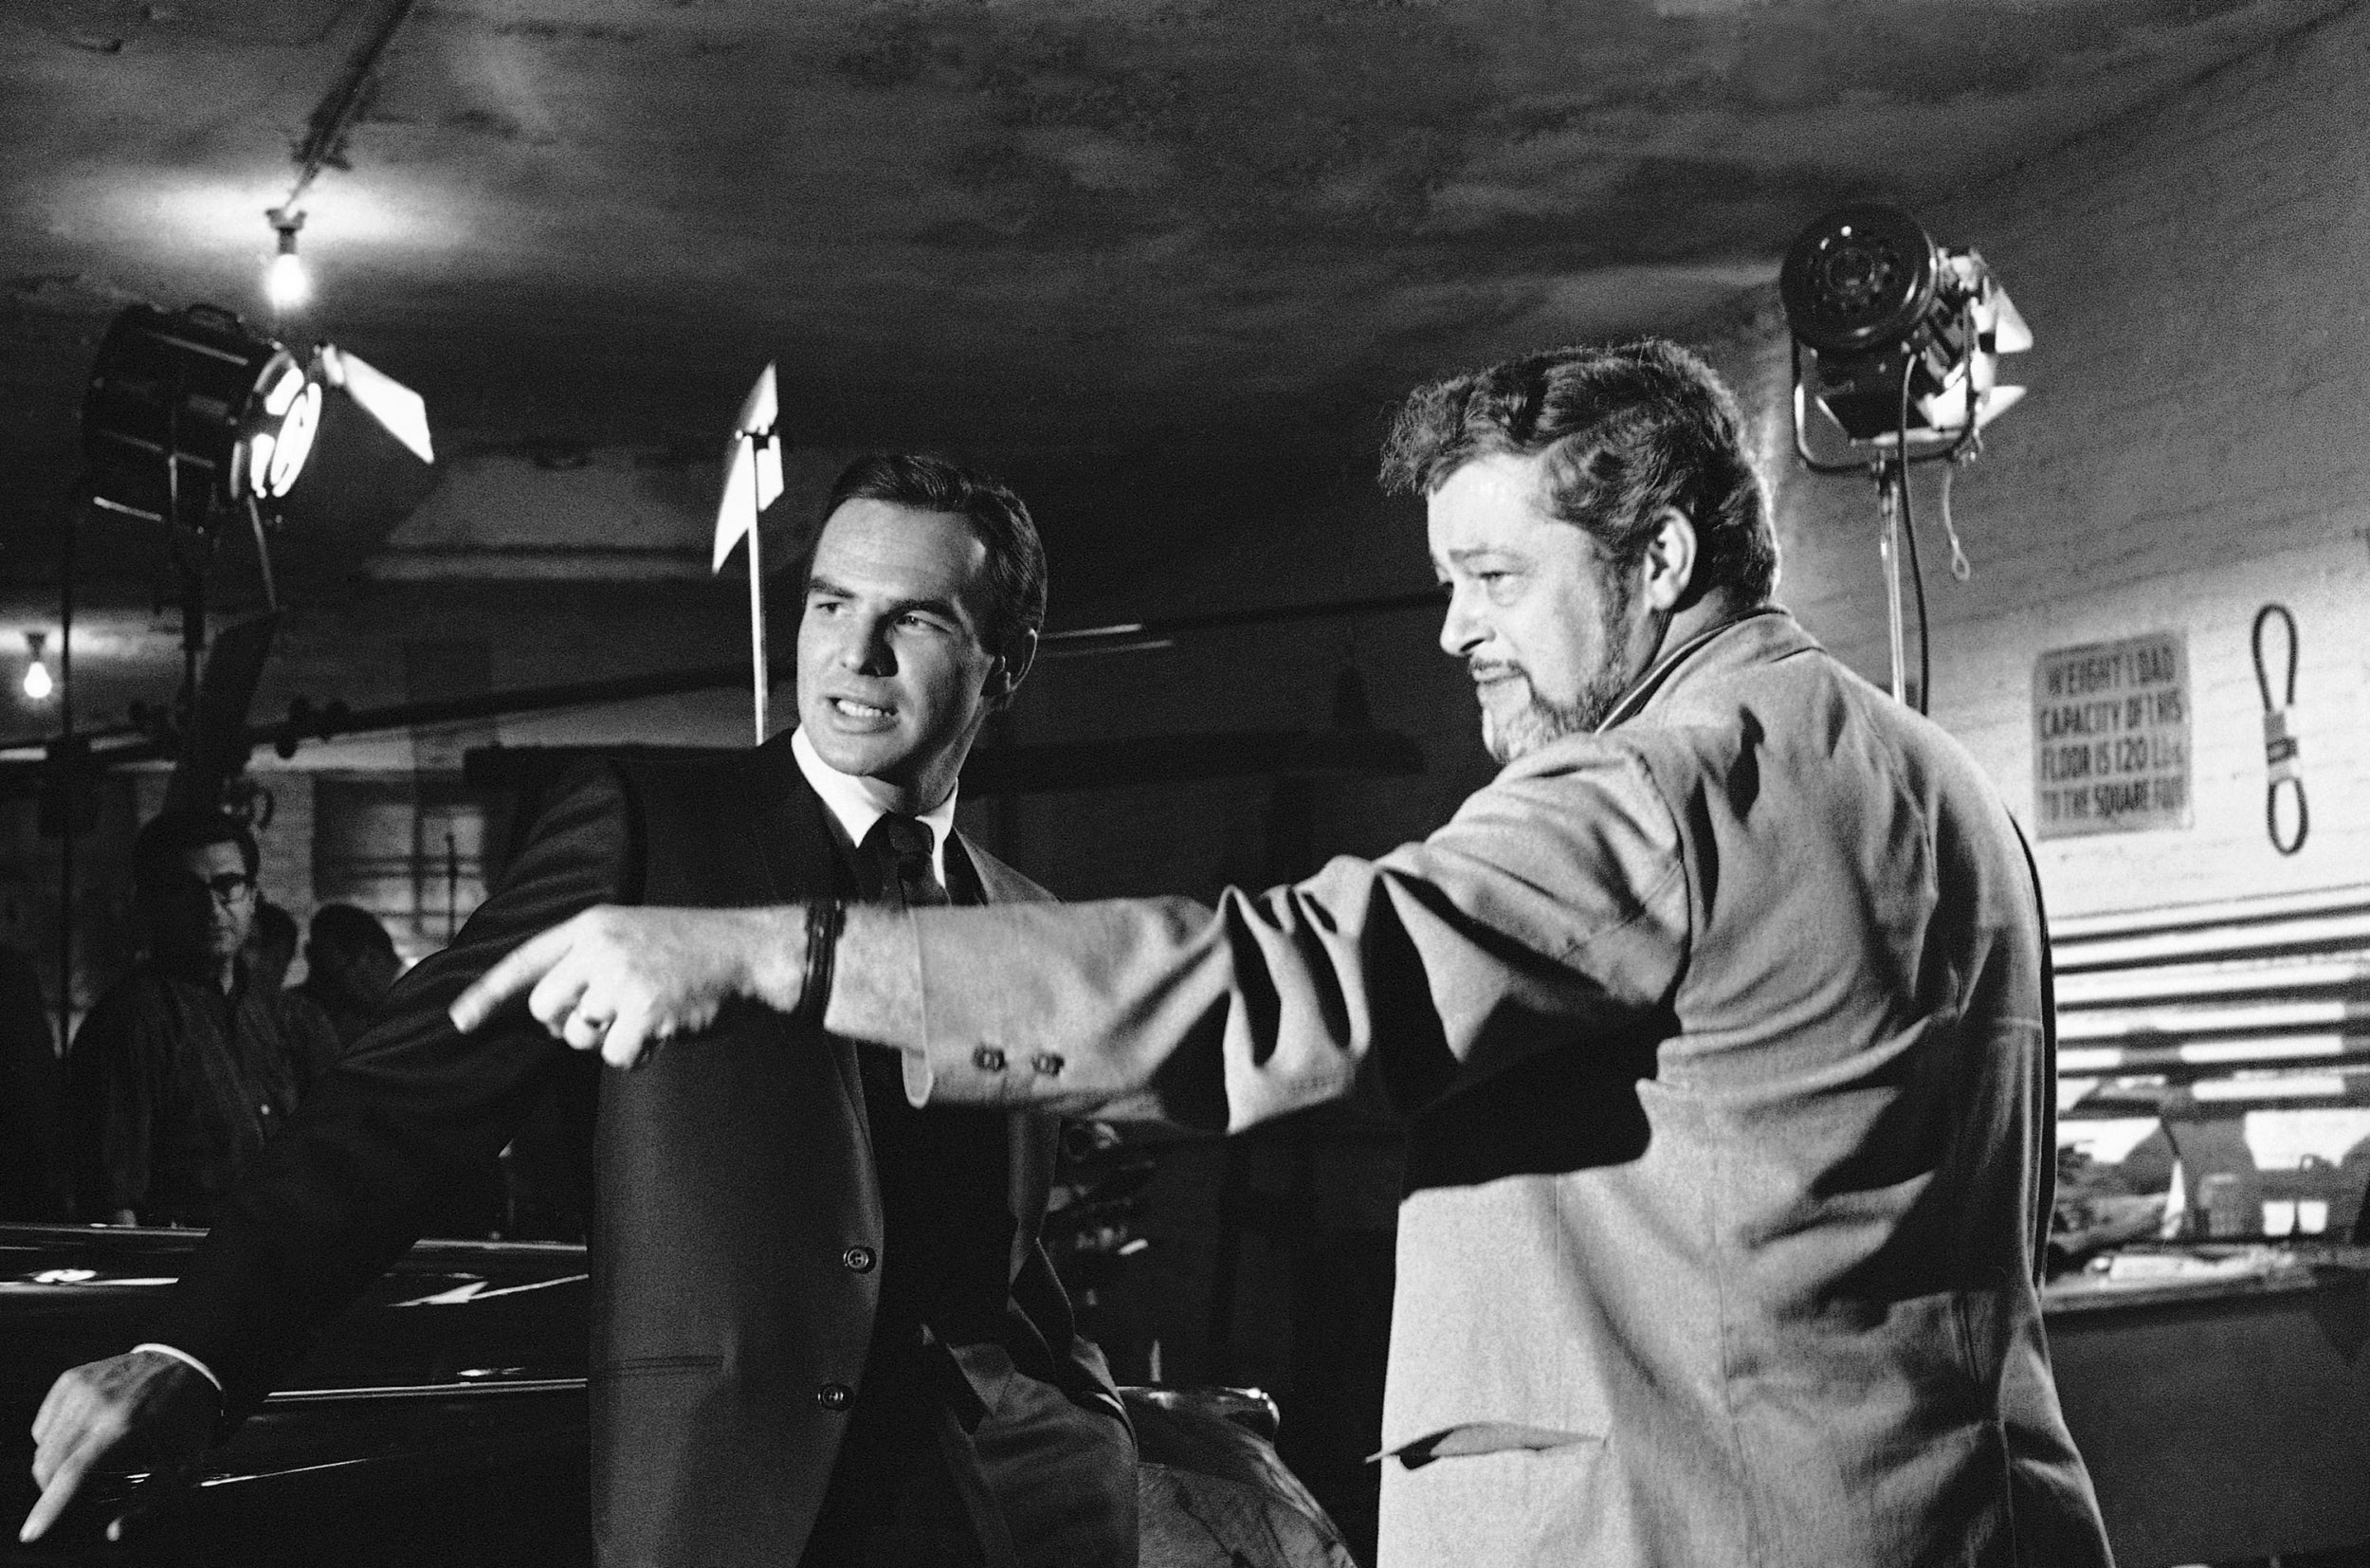 Reynolds (left) with director Paul Bogart during location shooting of TV series ‘Hawk’ in 1966